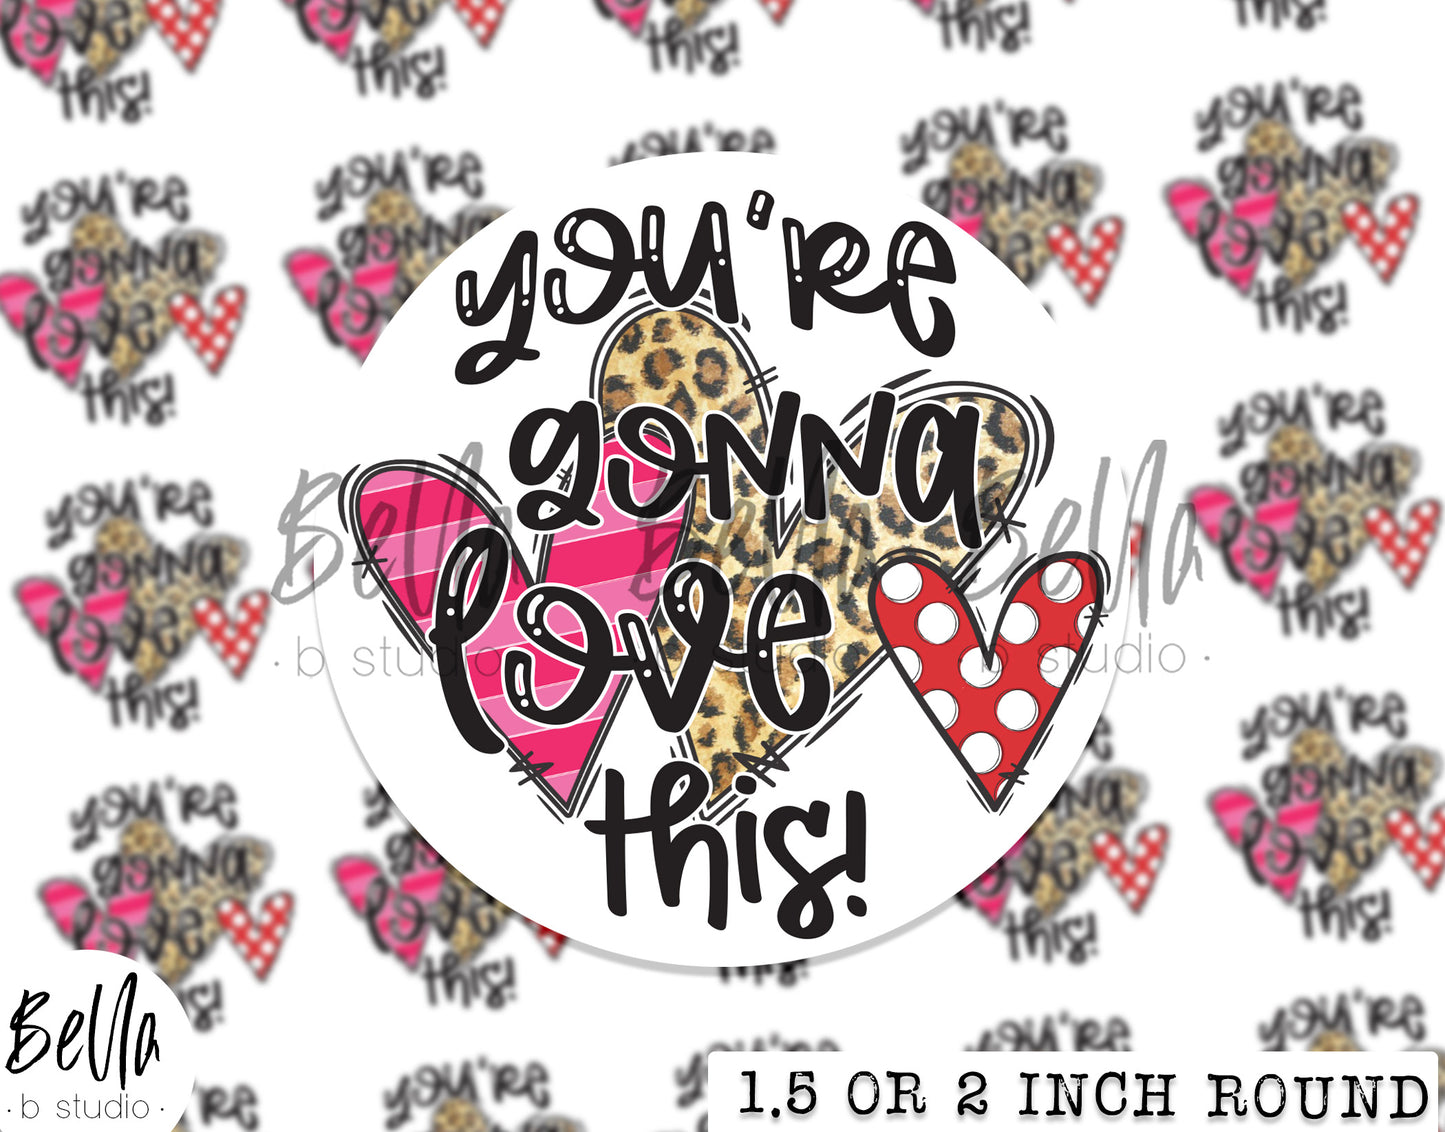 You're Gonna Love This Sticker Sheet - Small Business Packaging Stickers